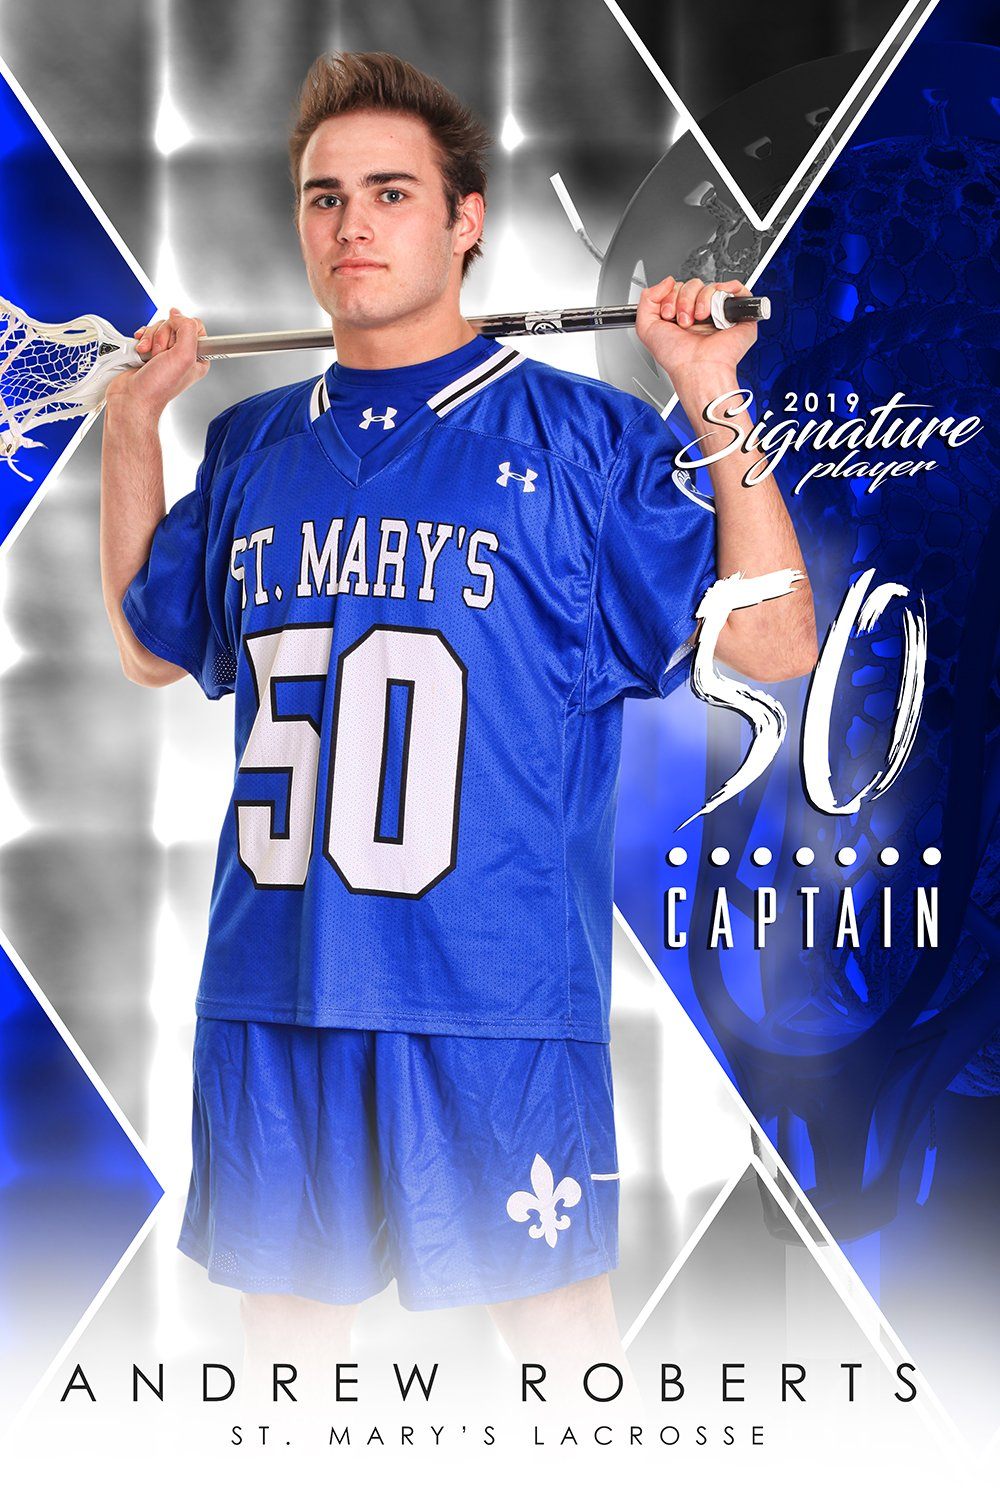 Lacrosse - v.2 - Signature Player - V Poster/Banner-Photoshop Template - Photo Solutions